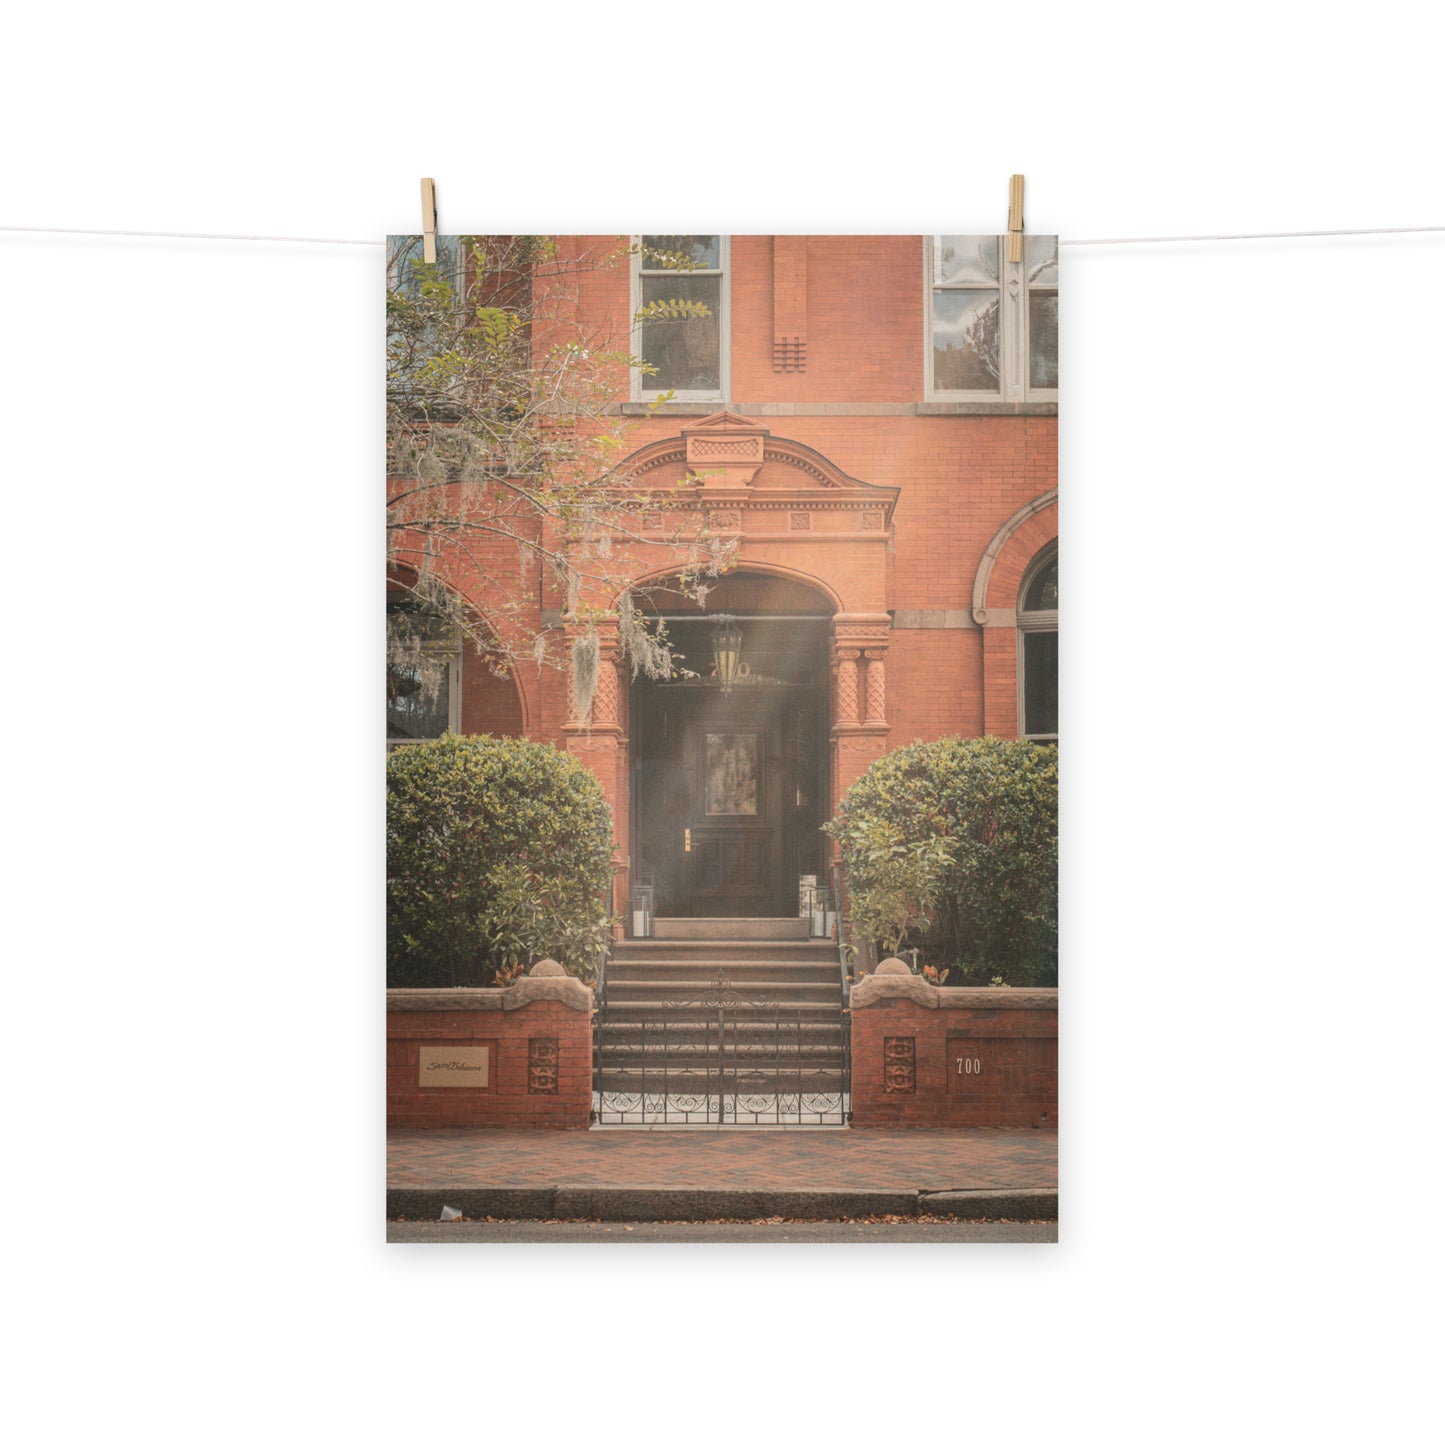 Architectural / Industrial / Cityscape Abstract Decor Lewis Kayton House Doorway Mansion on Forsyth Park Loose Wall Art Print 8" x 10"